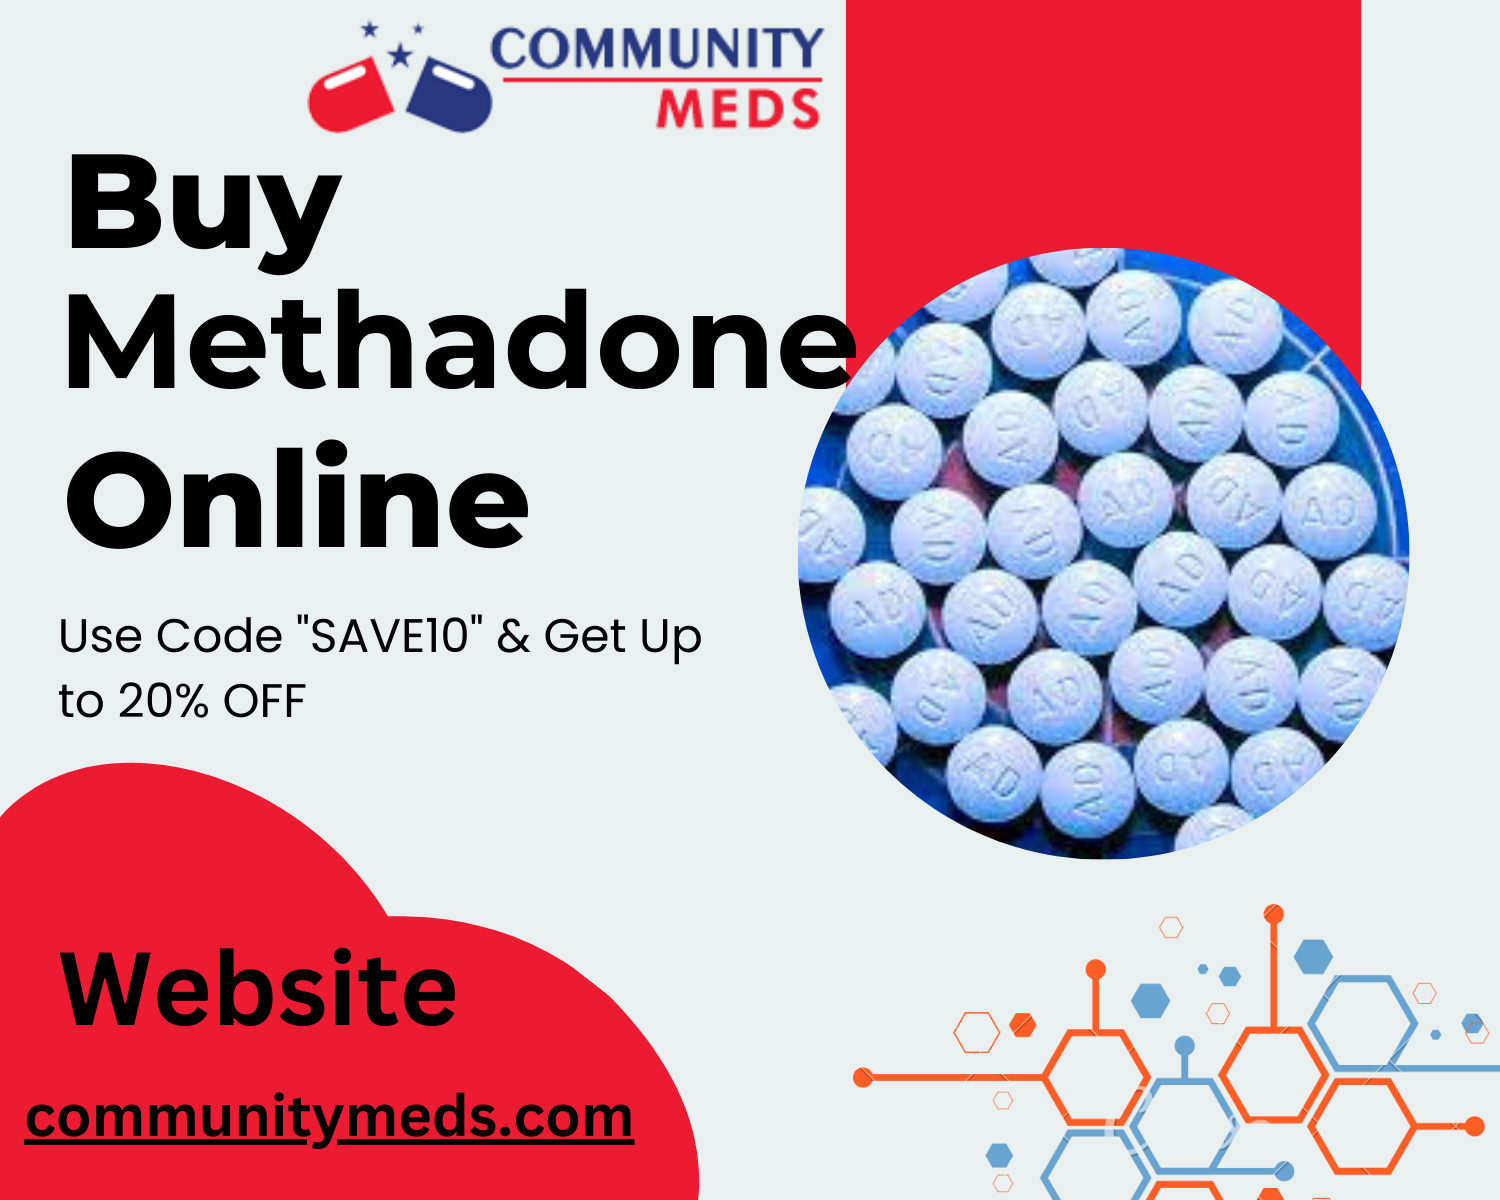 Purchase Methadone Online Priority FedEx Shipping